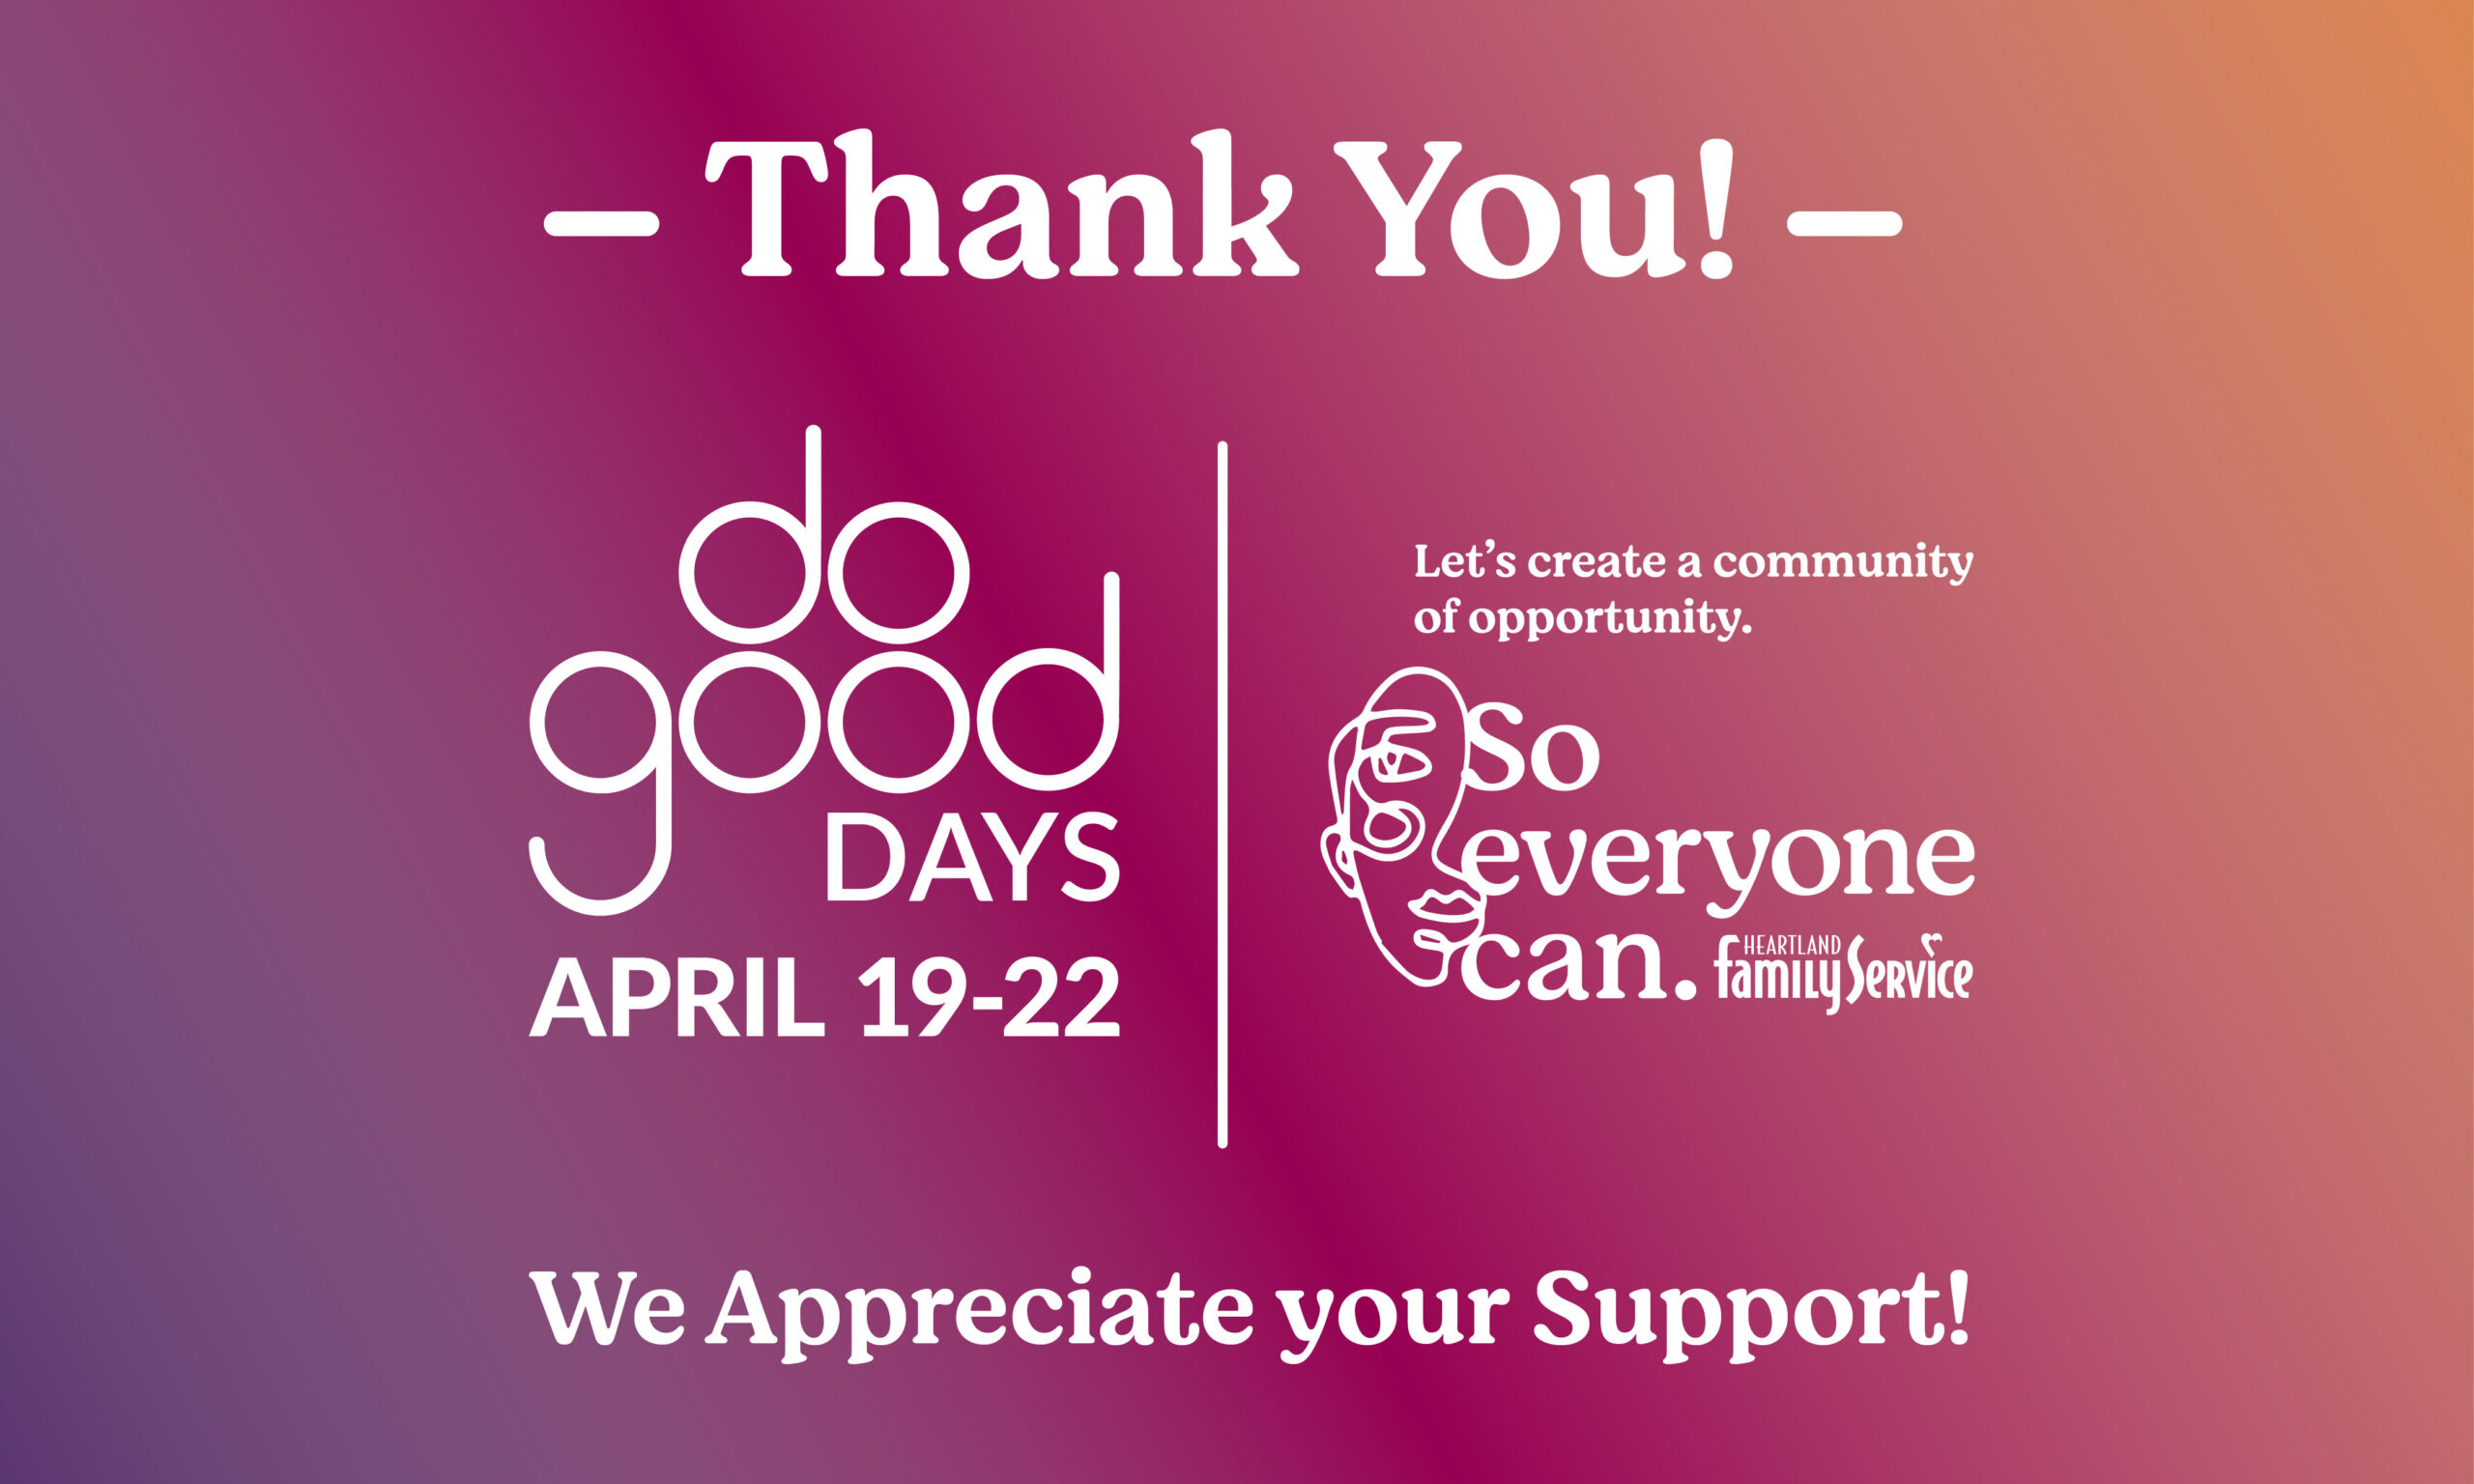 Do Good Days Thank you Graphic